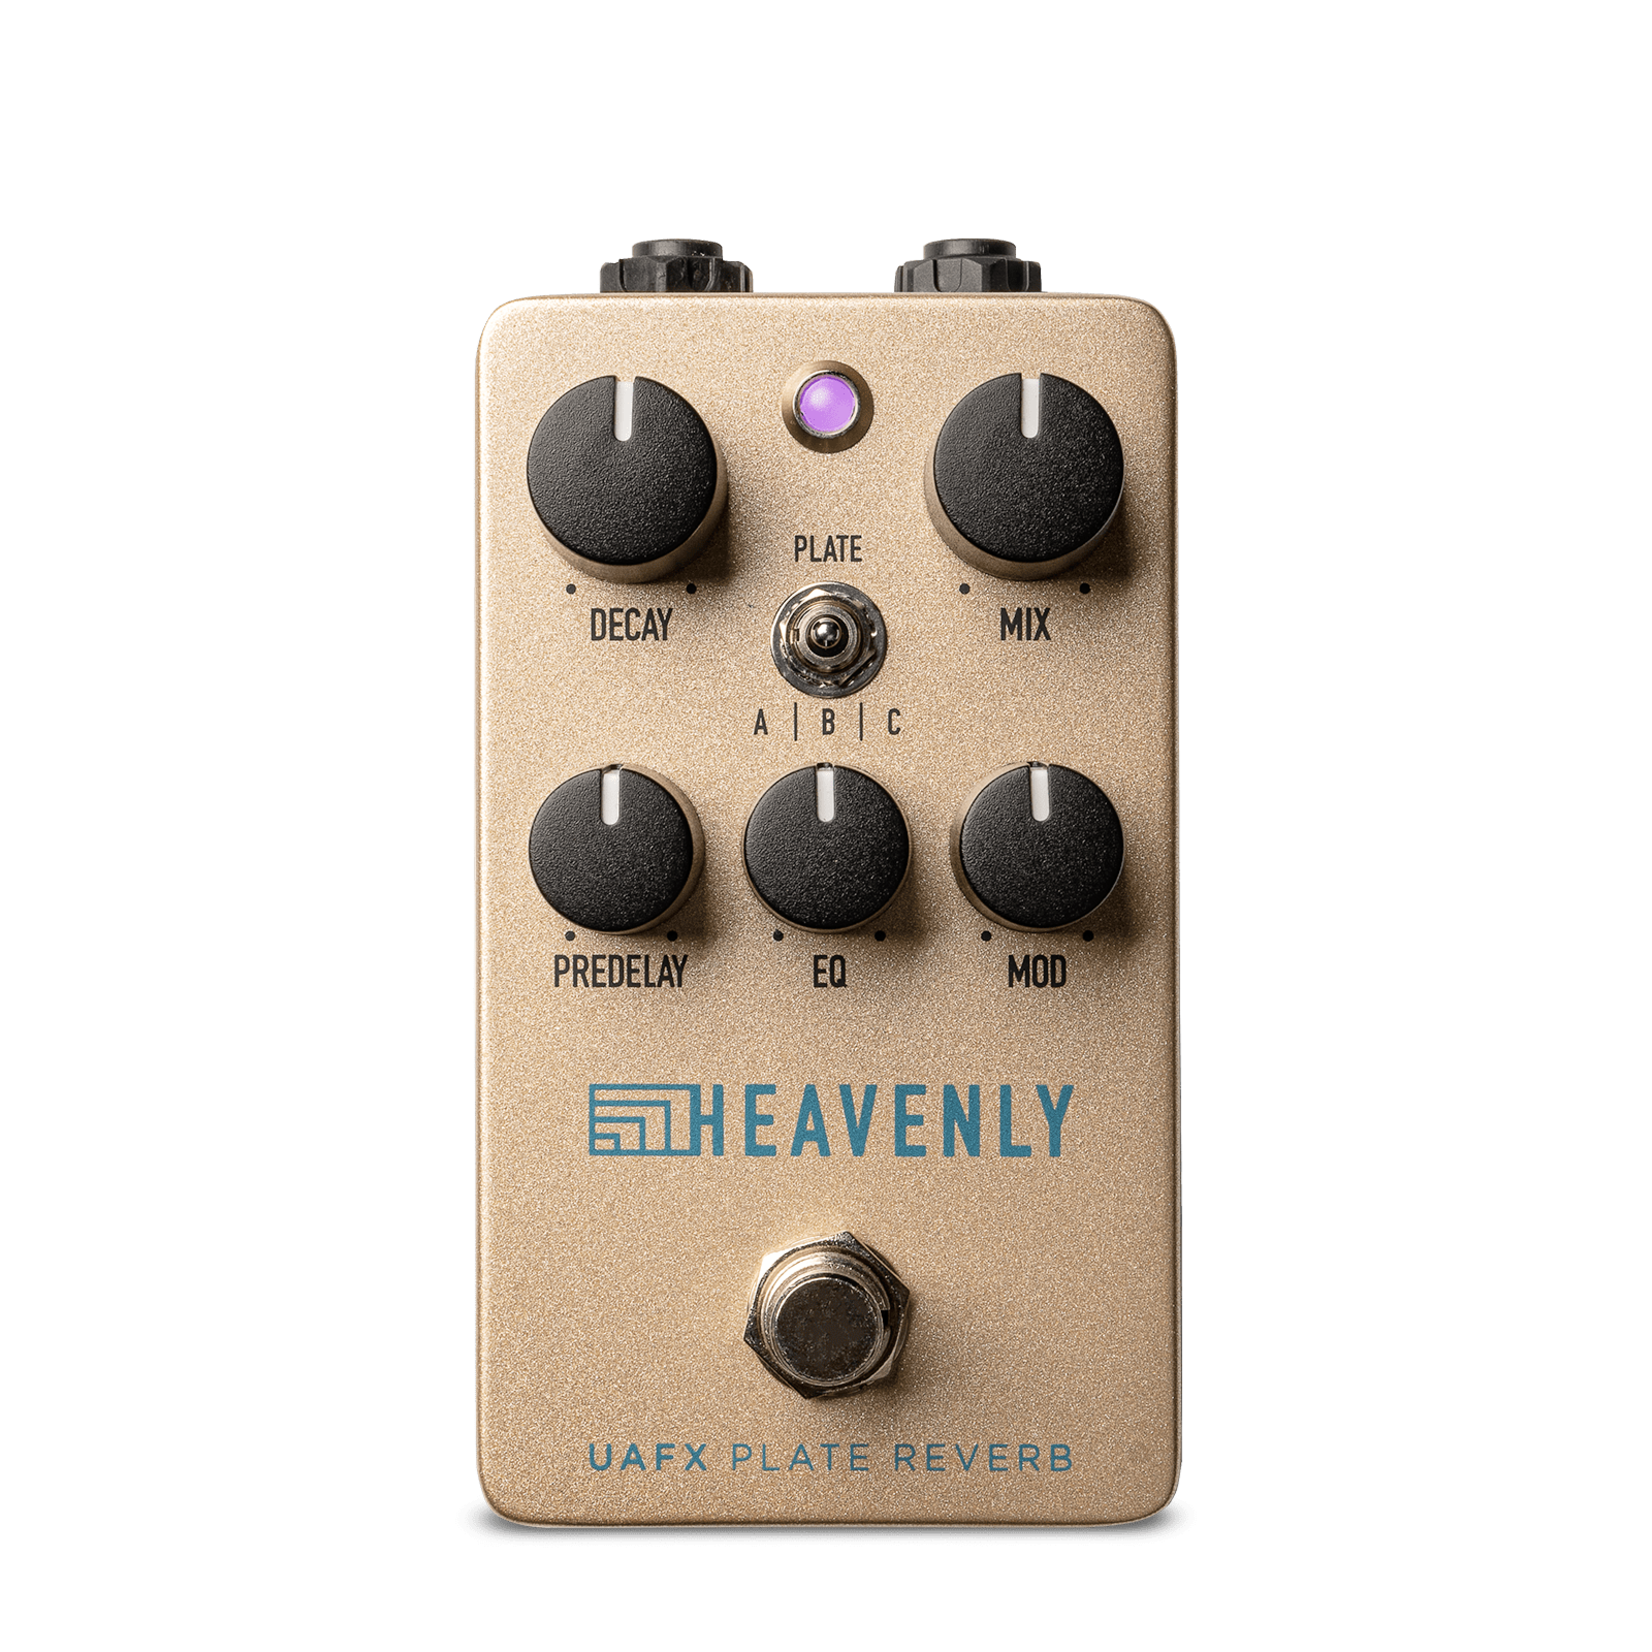 Universal Audio Universal Audio UAFX Compact Heavenly Plate Reverb Pedal